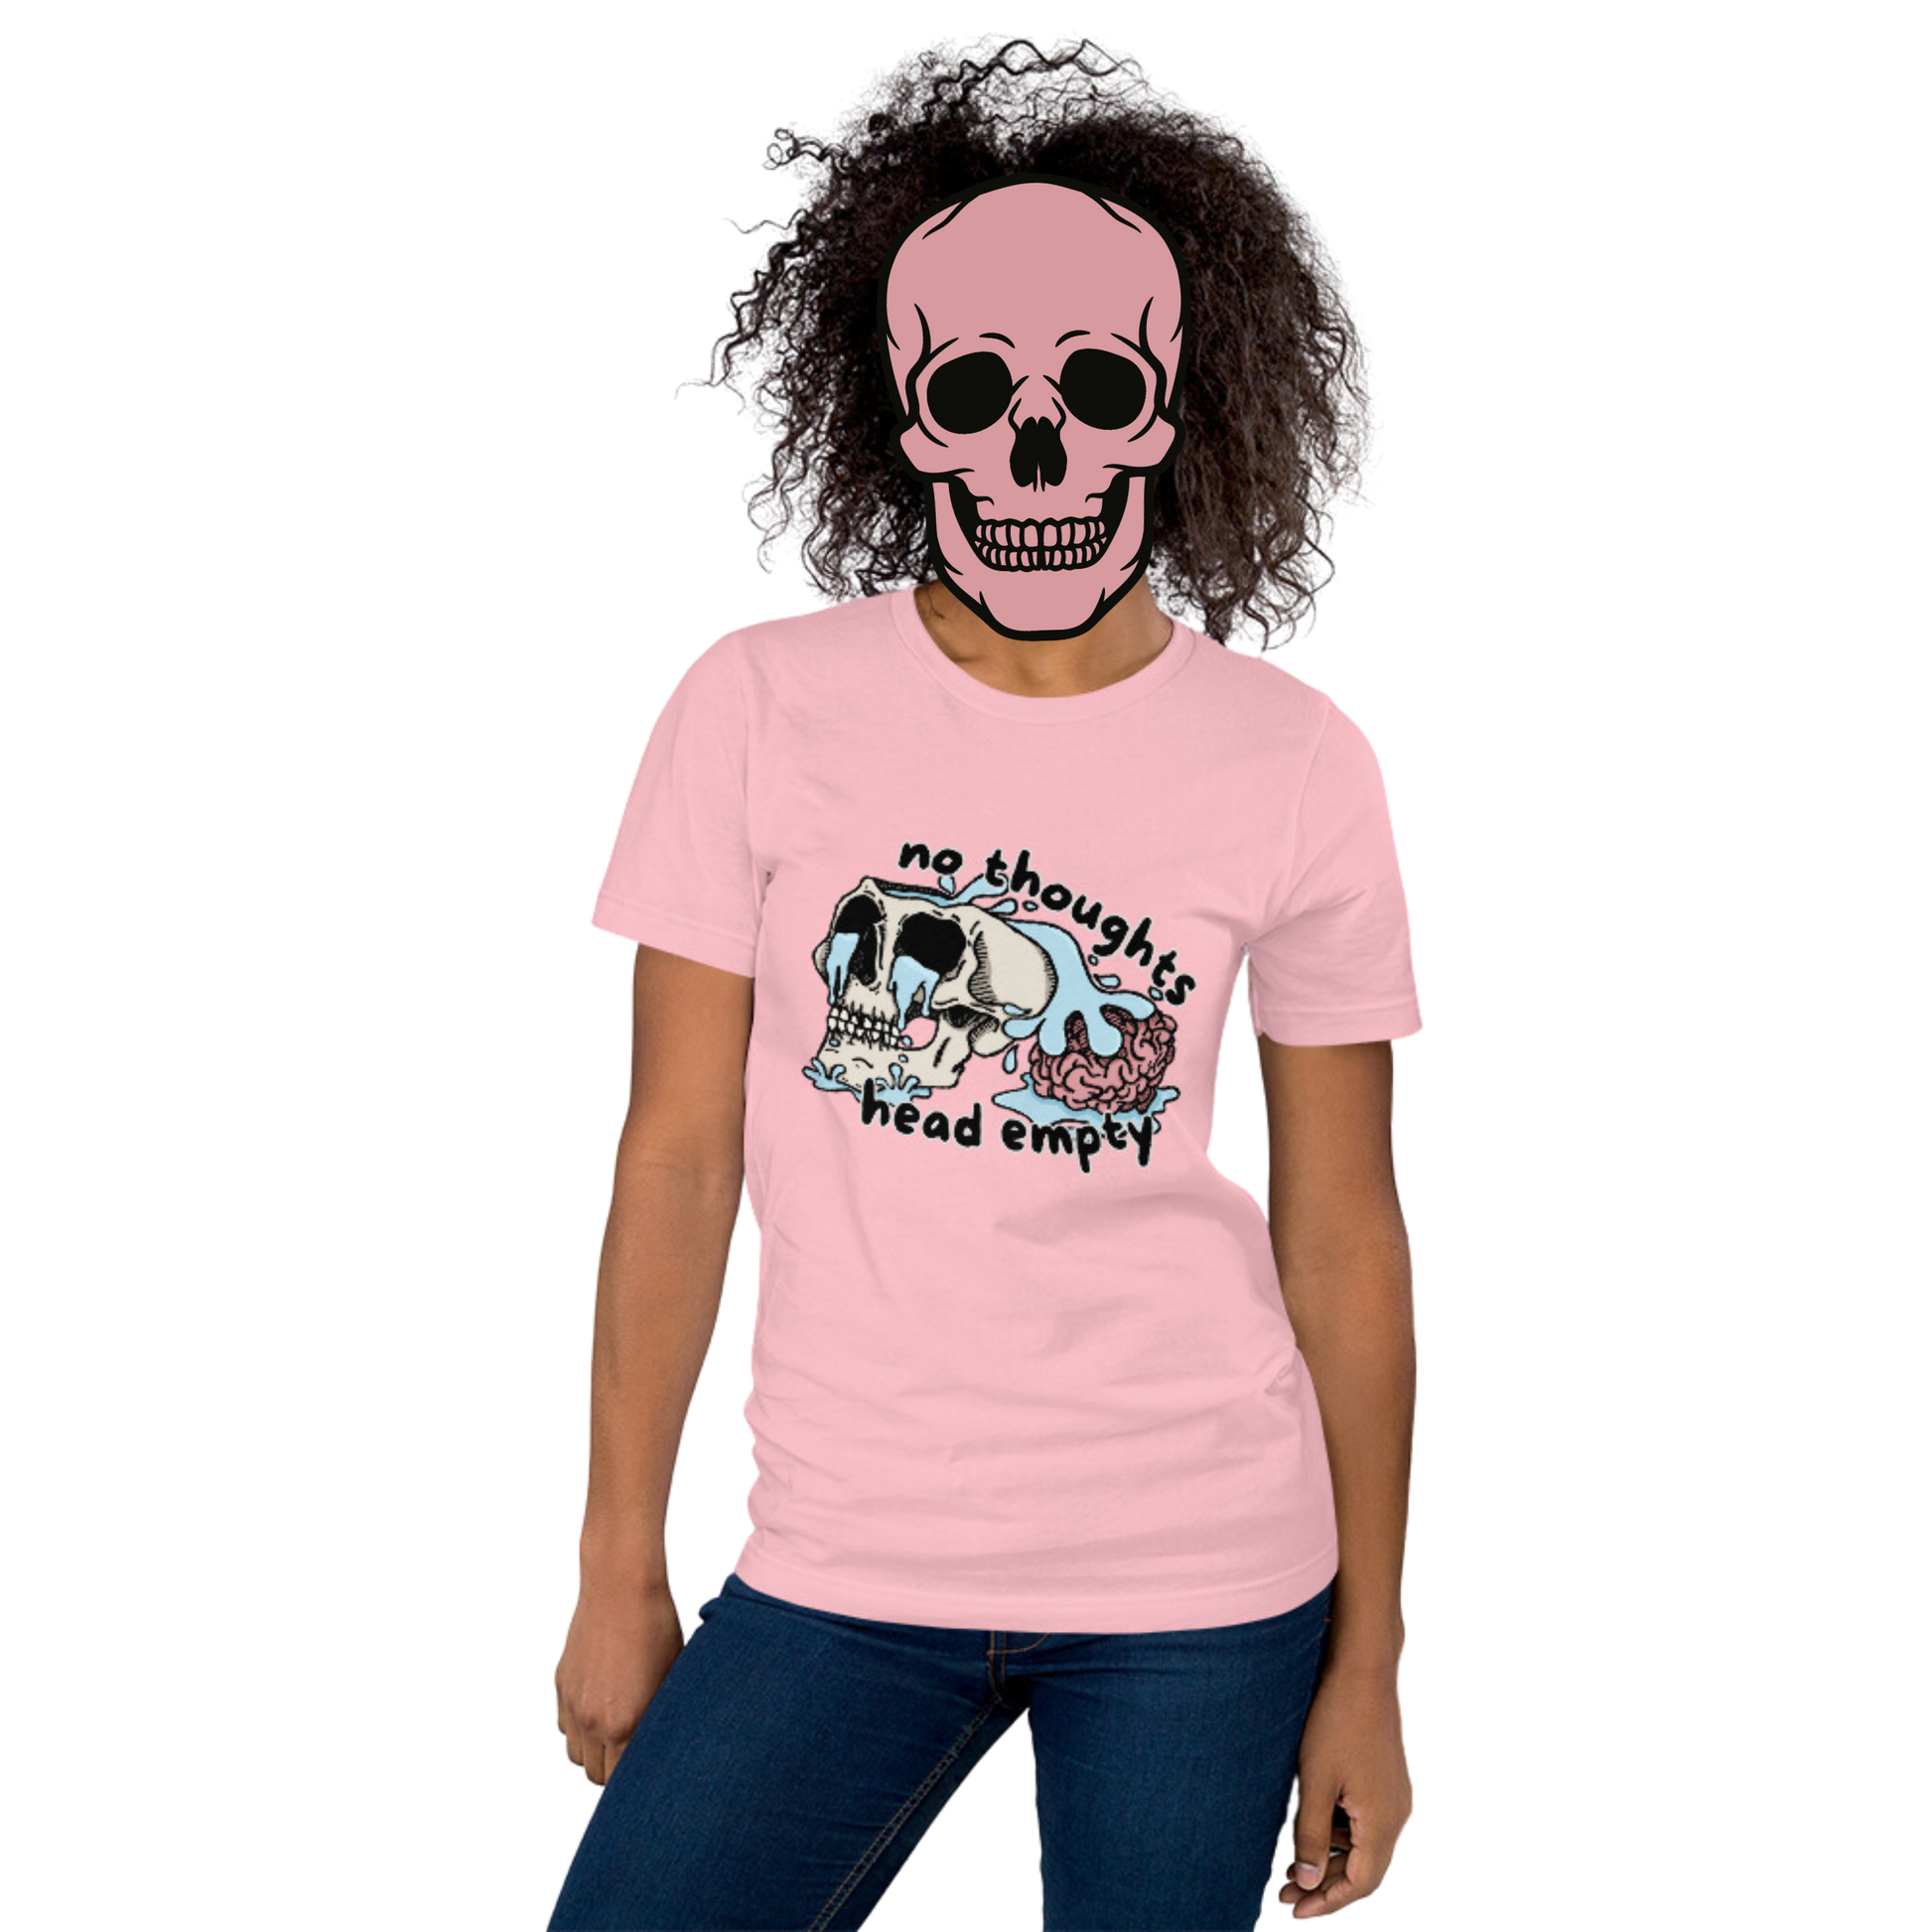 no thoughts head empty t-shirt model in pink - gaslit apparel